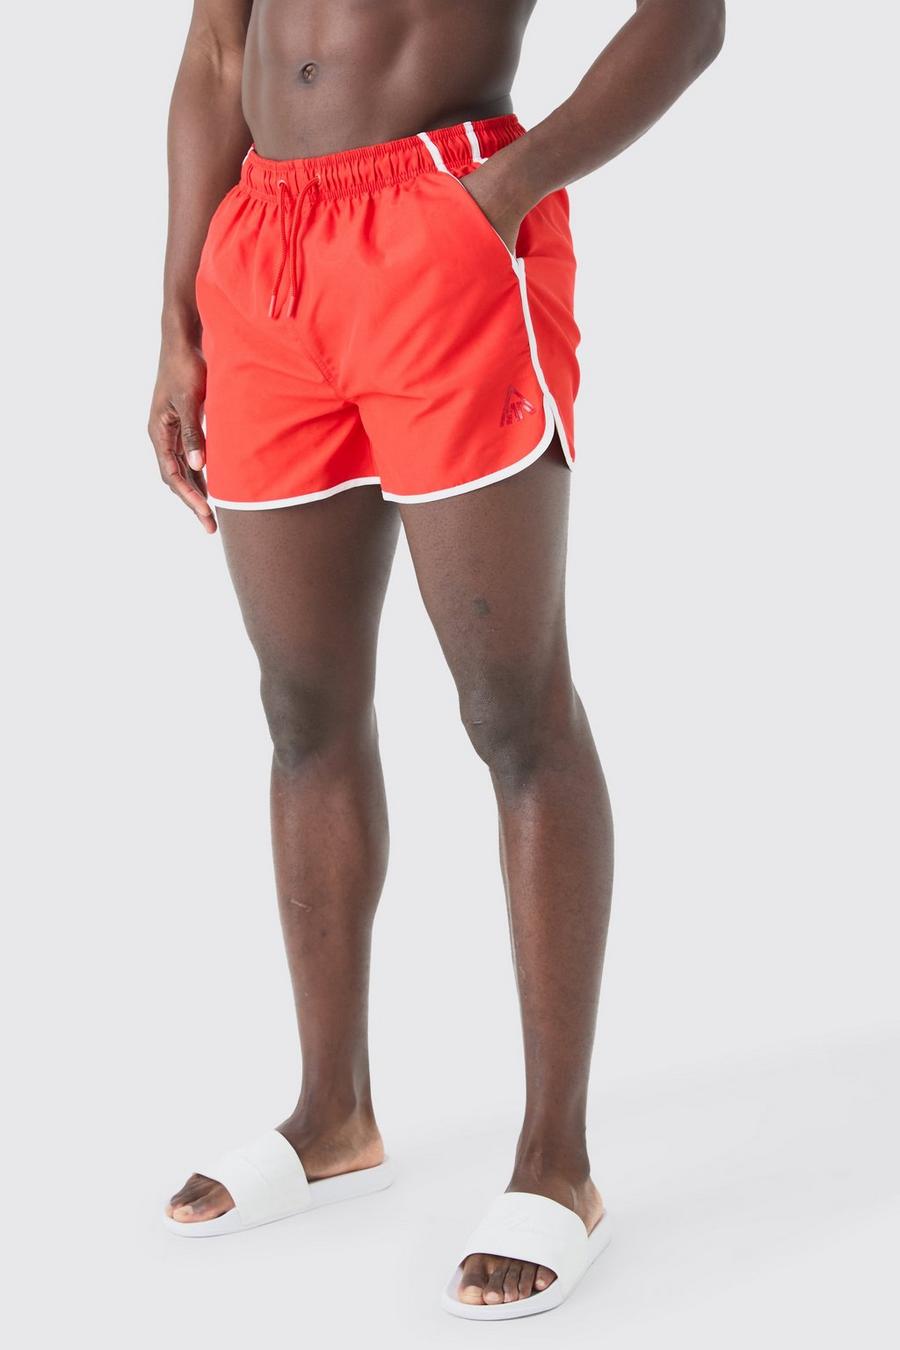 Red Good summer shorts for boys